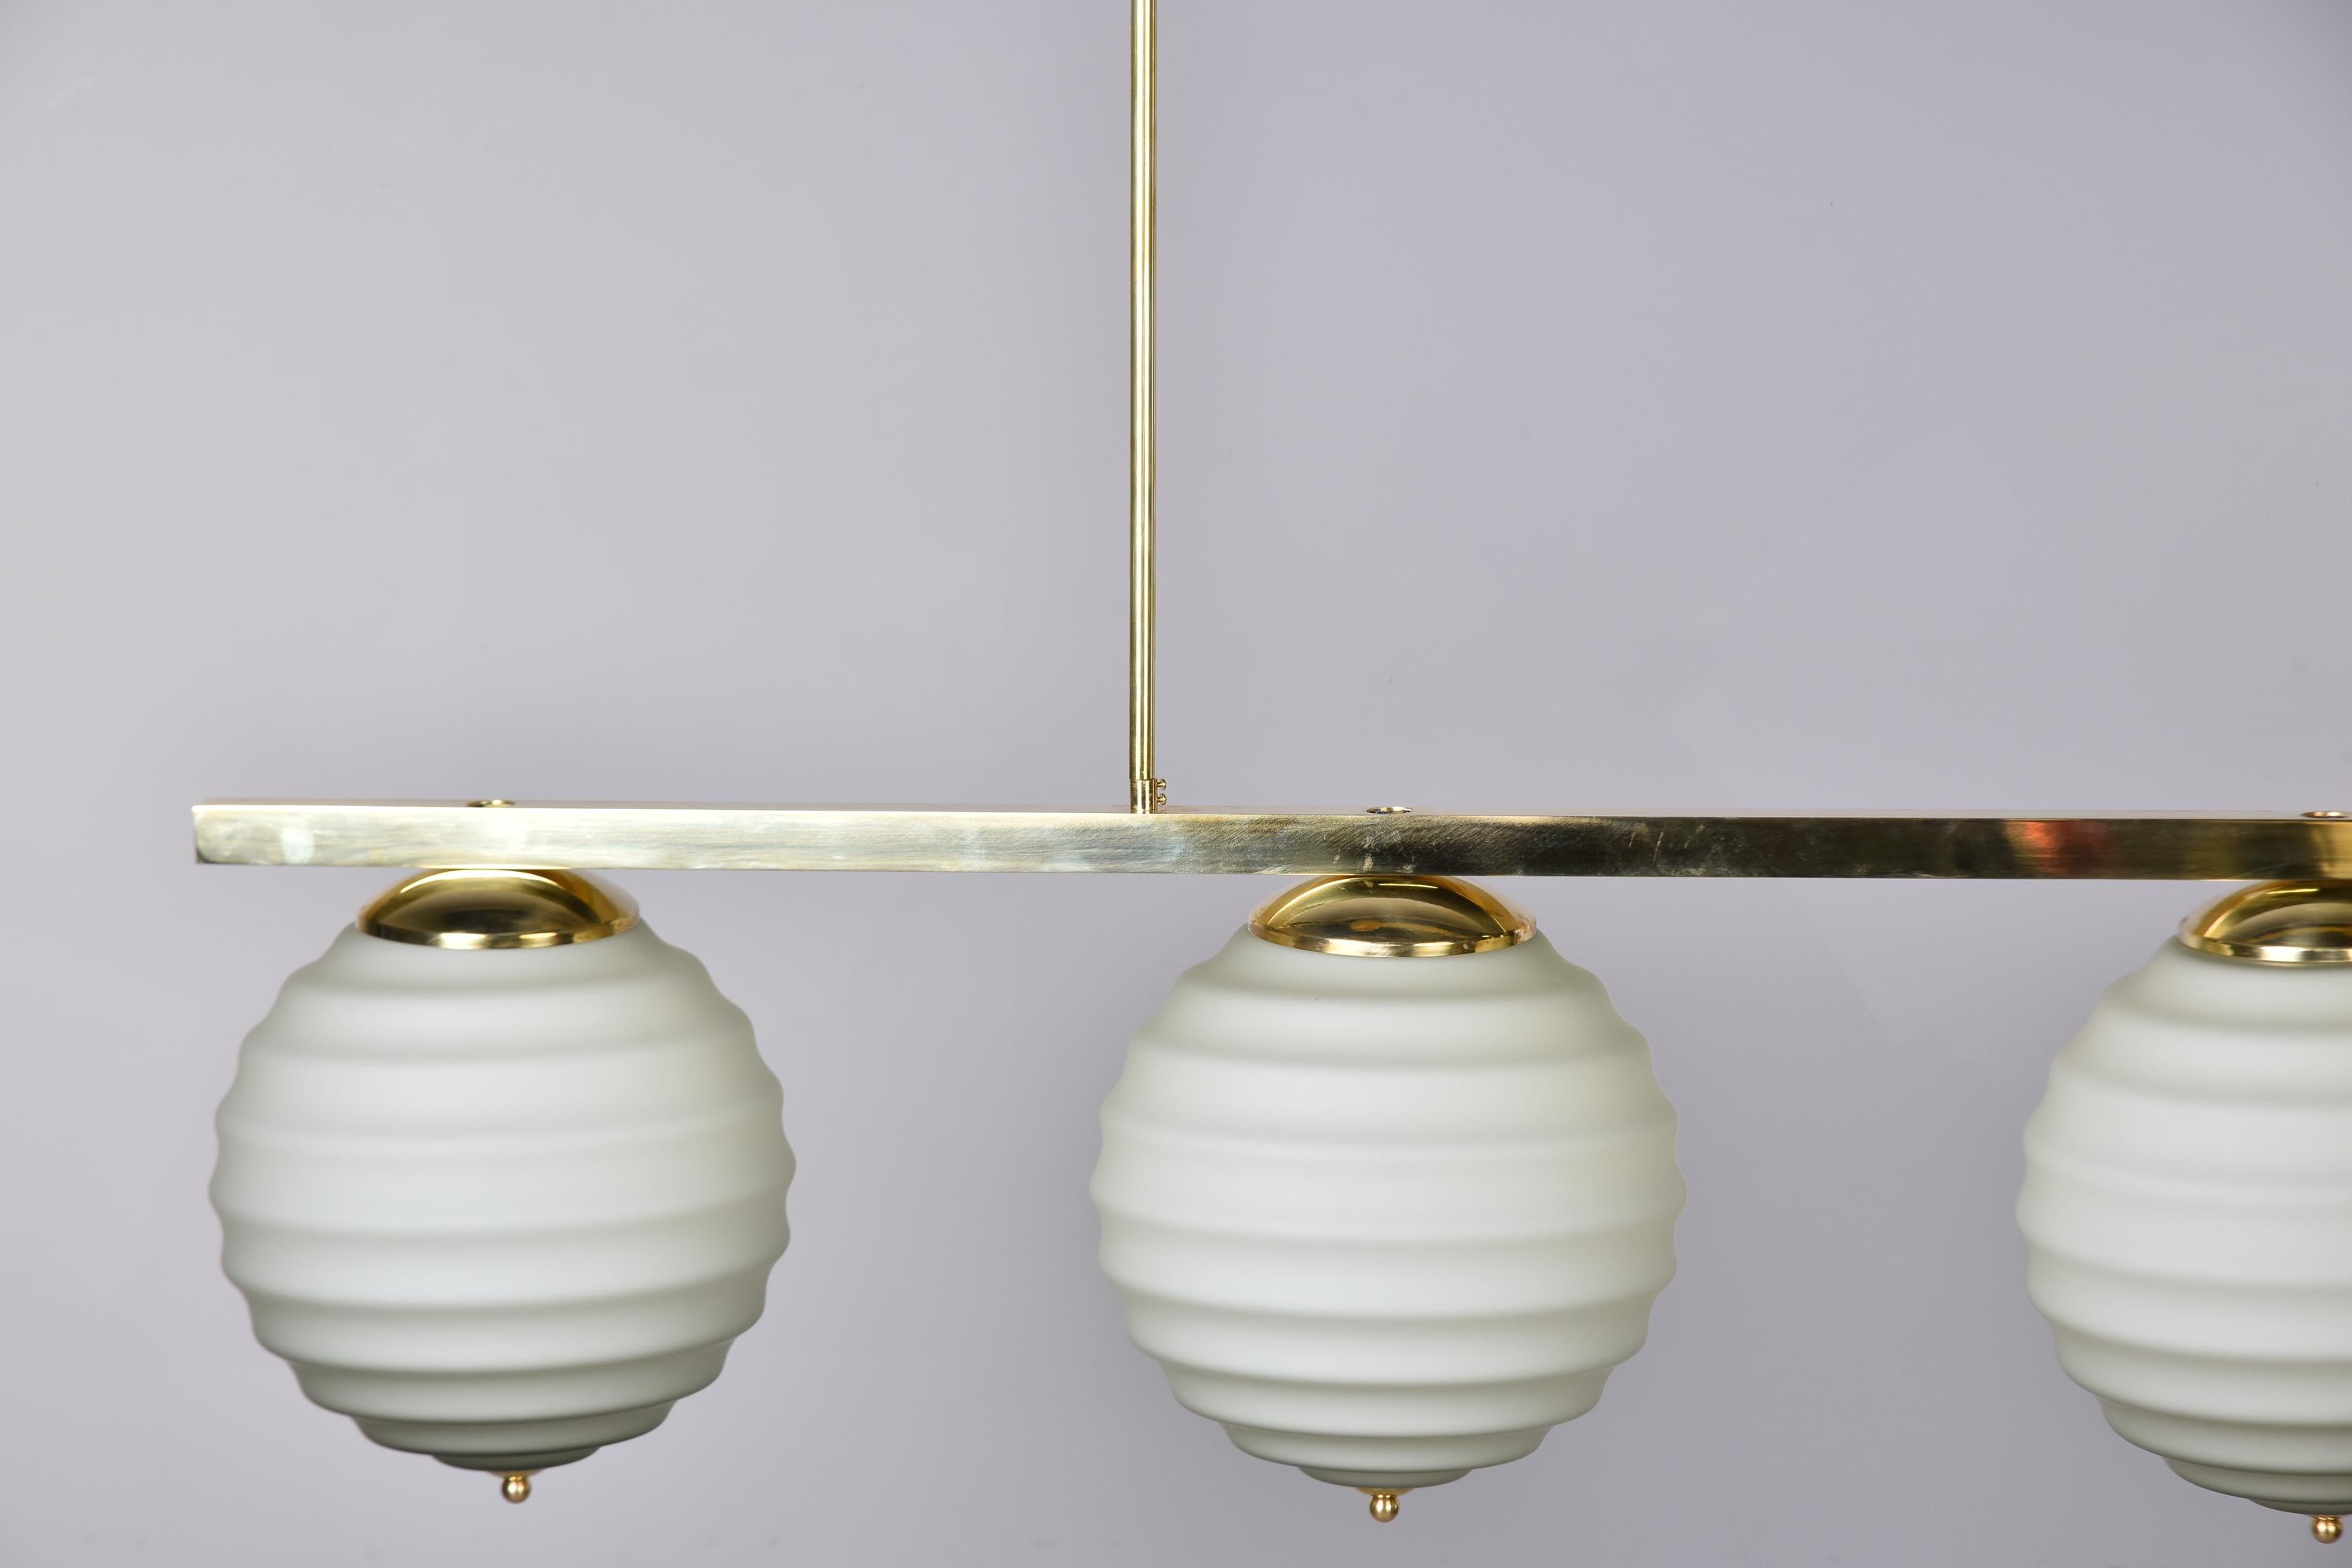 New Italian Fixture with Four Pale Taupe Globes on Horizontal Brass Bar For Sale 6